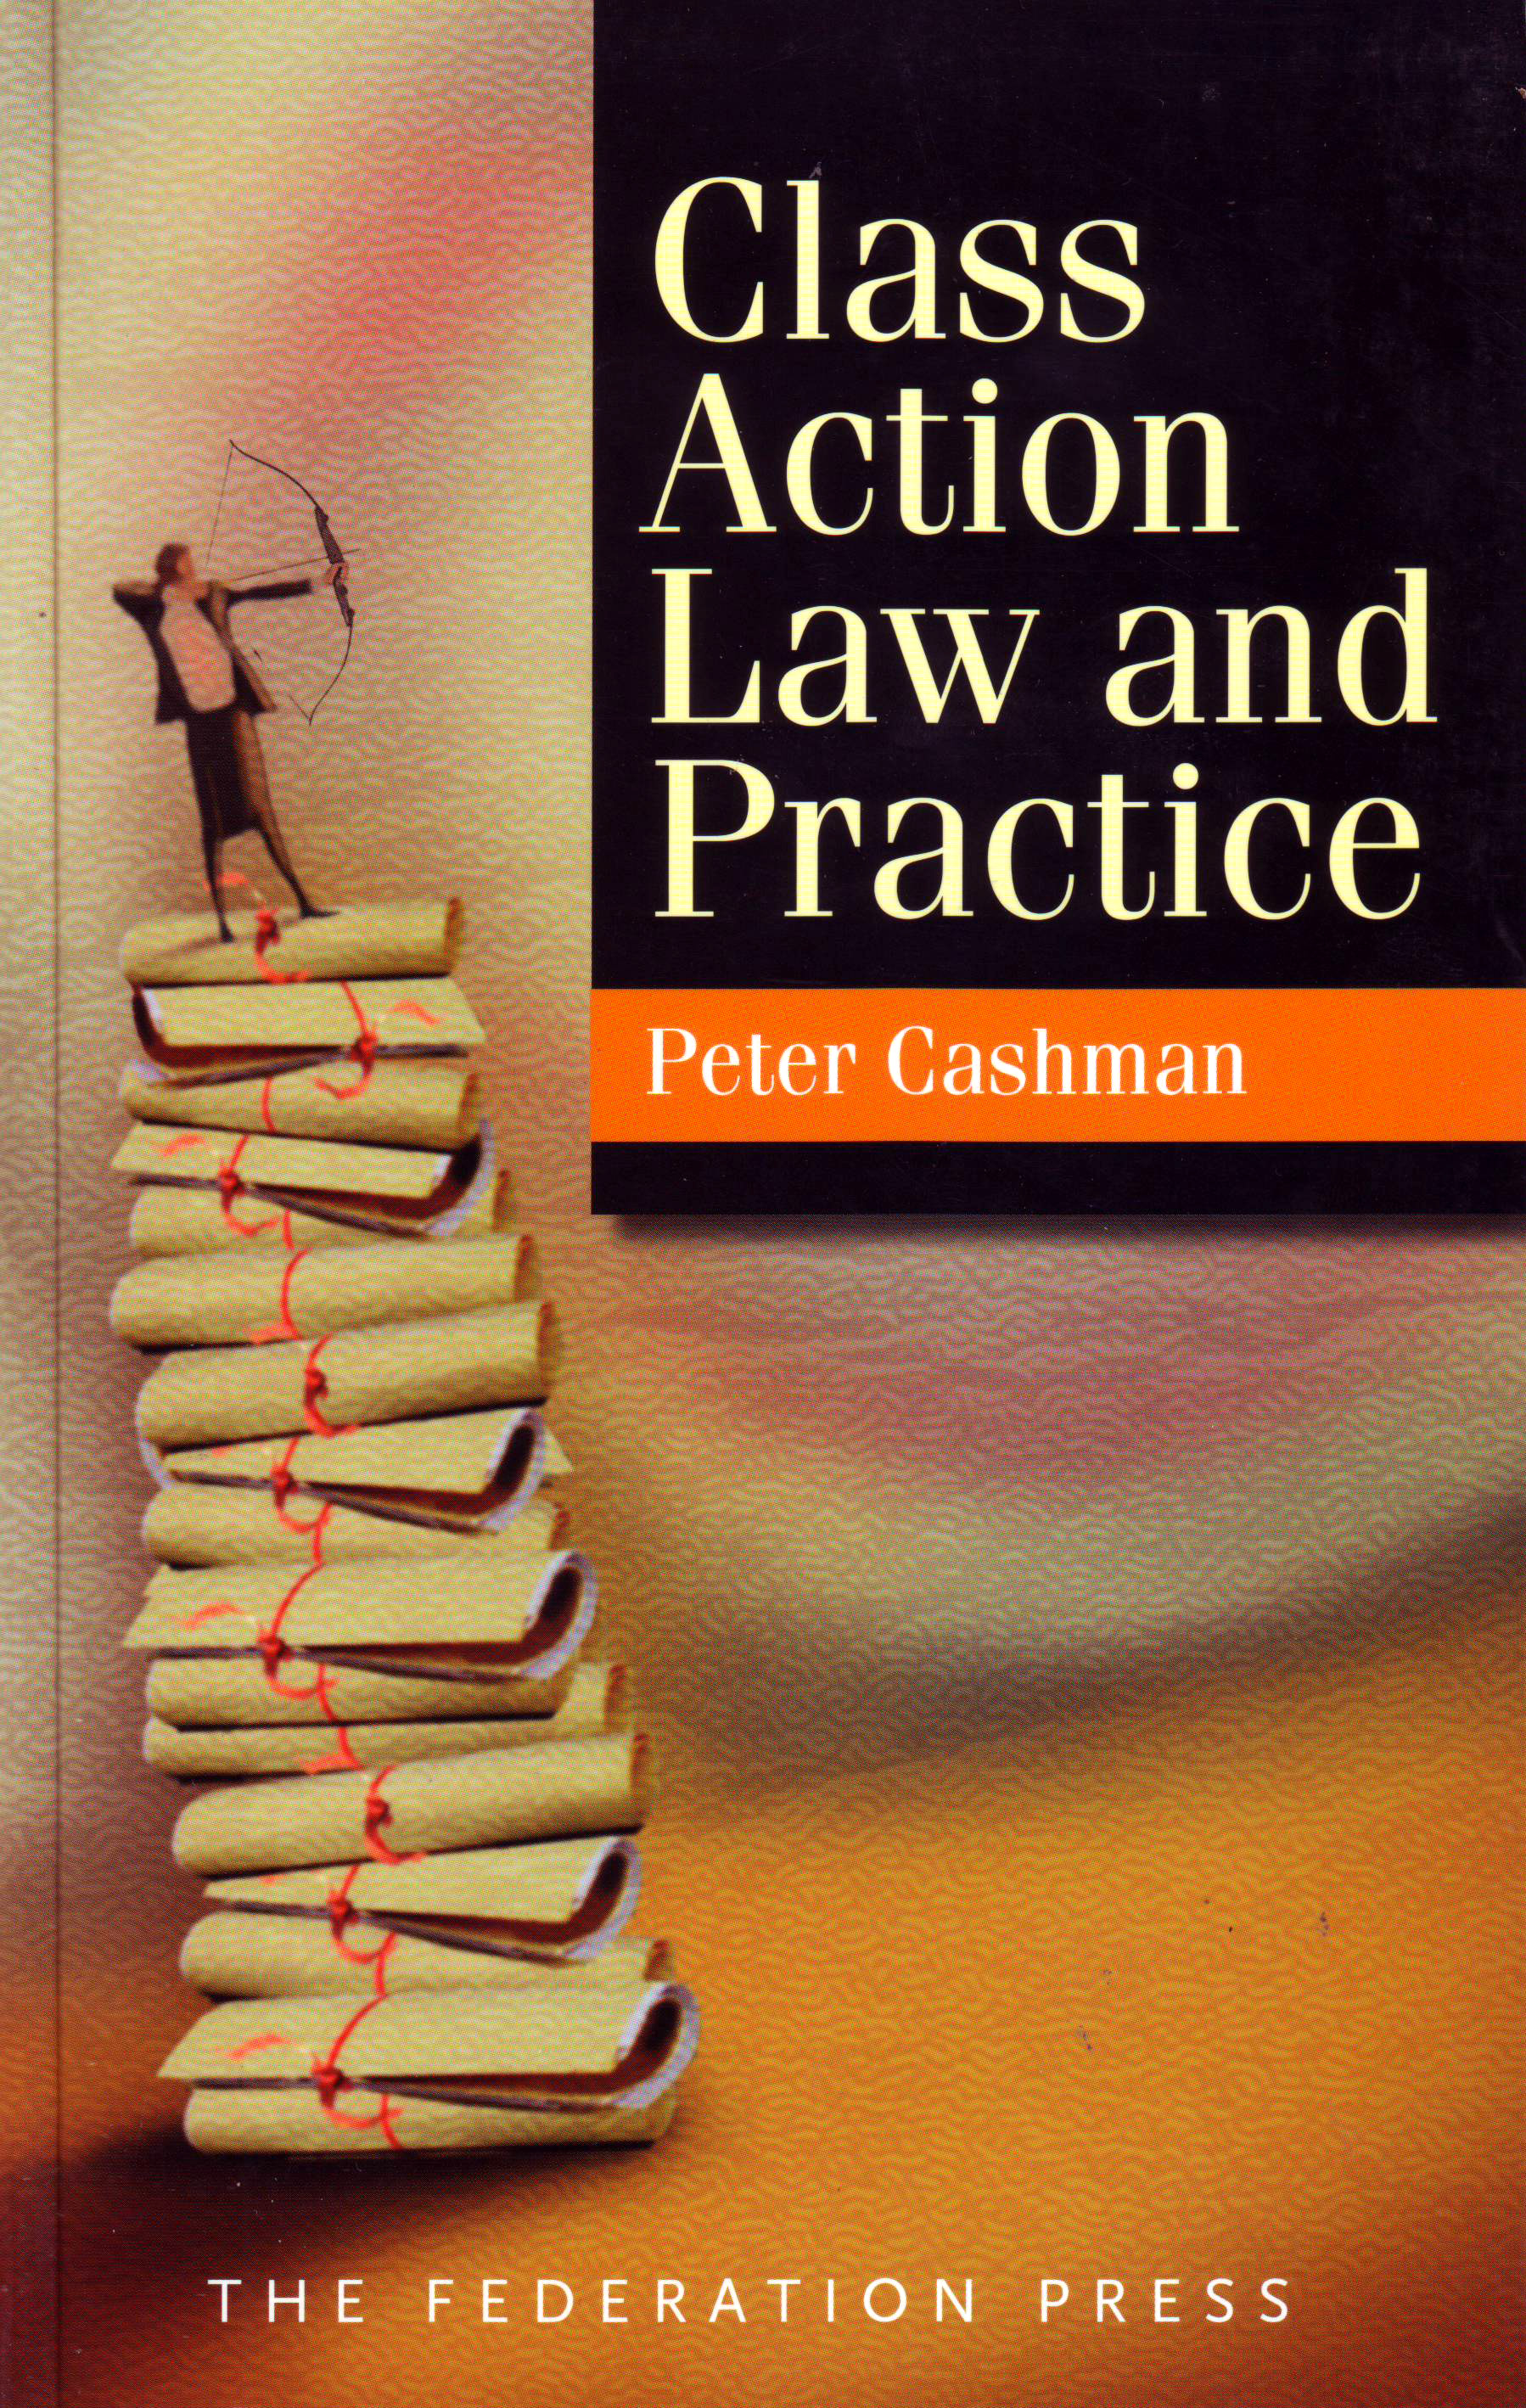 Class Action Law and Practice